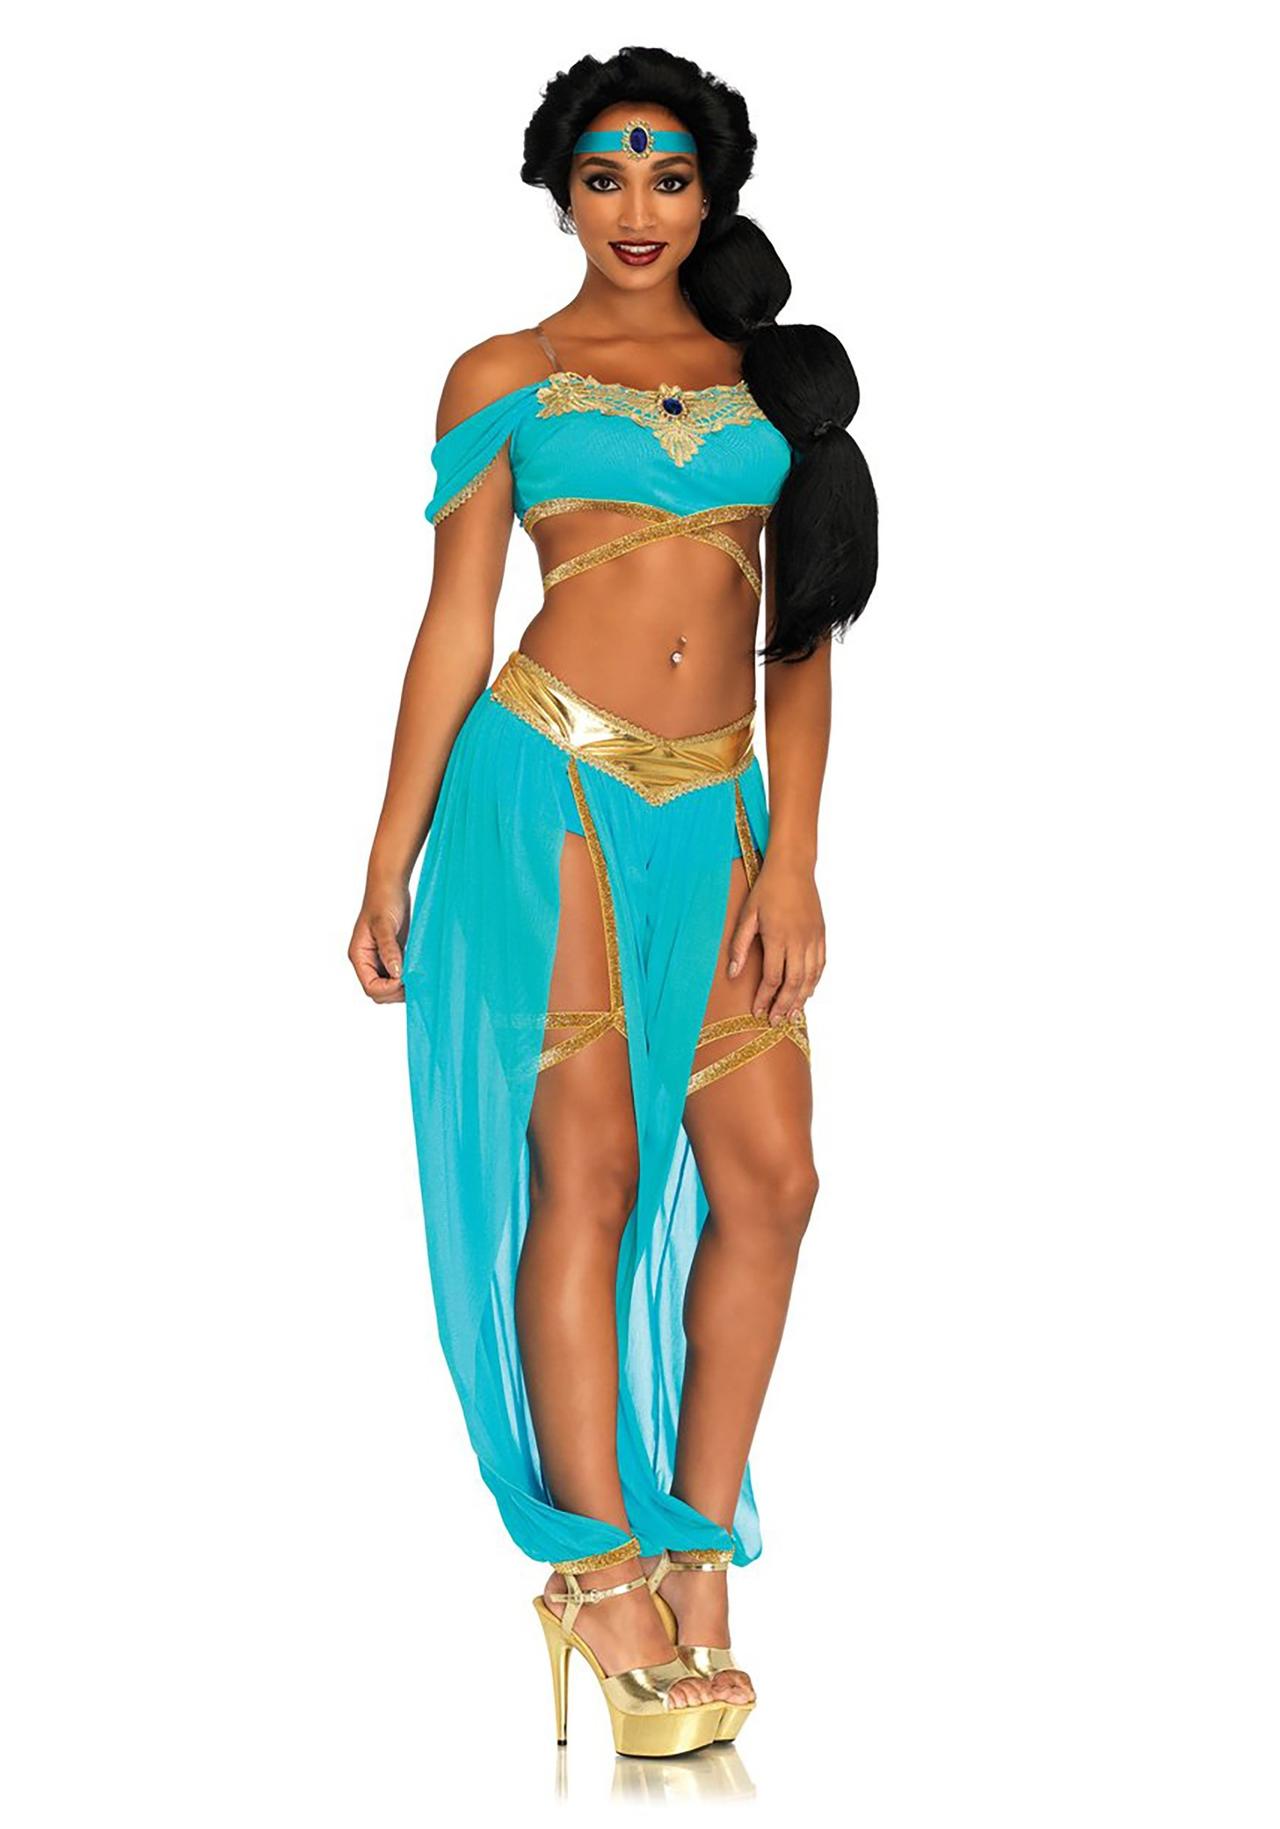 Disney Princess Sexy Costumes Adult - 30 Best Sexy Halloween Costumes - hitched.co.uk